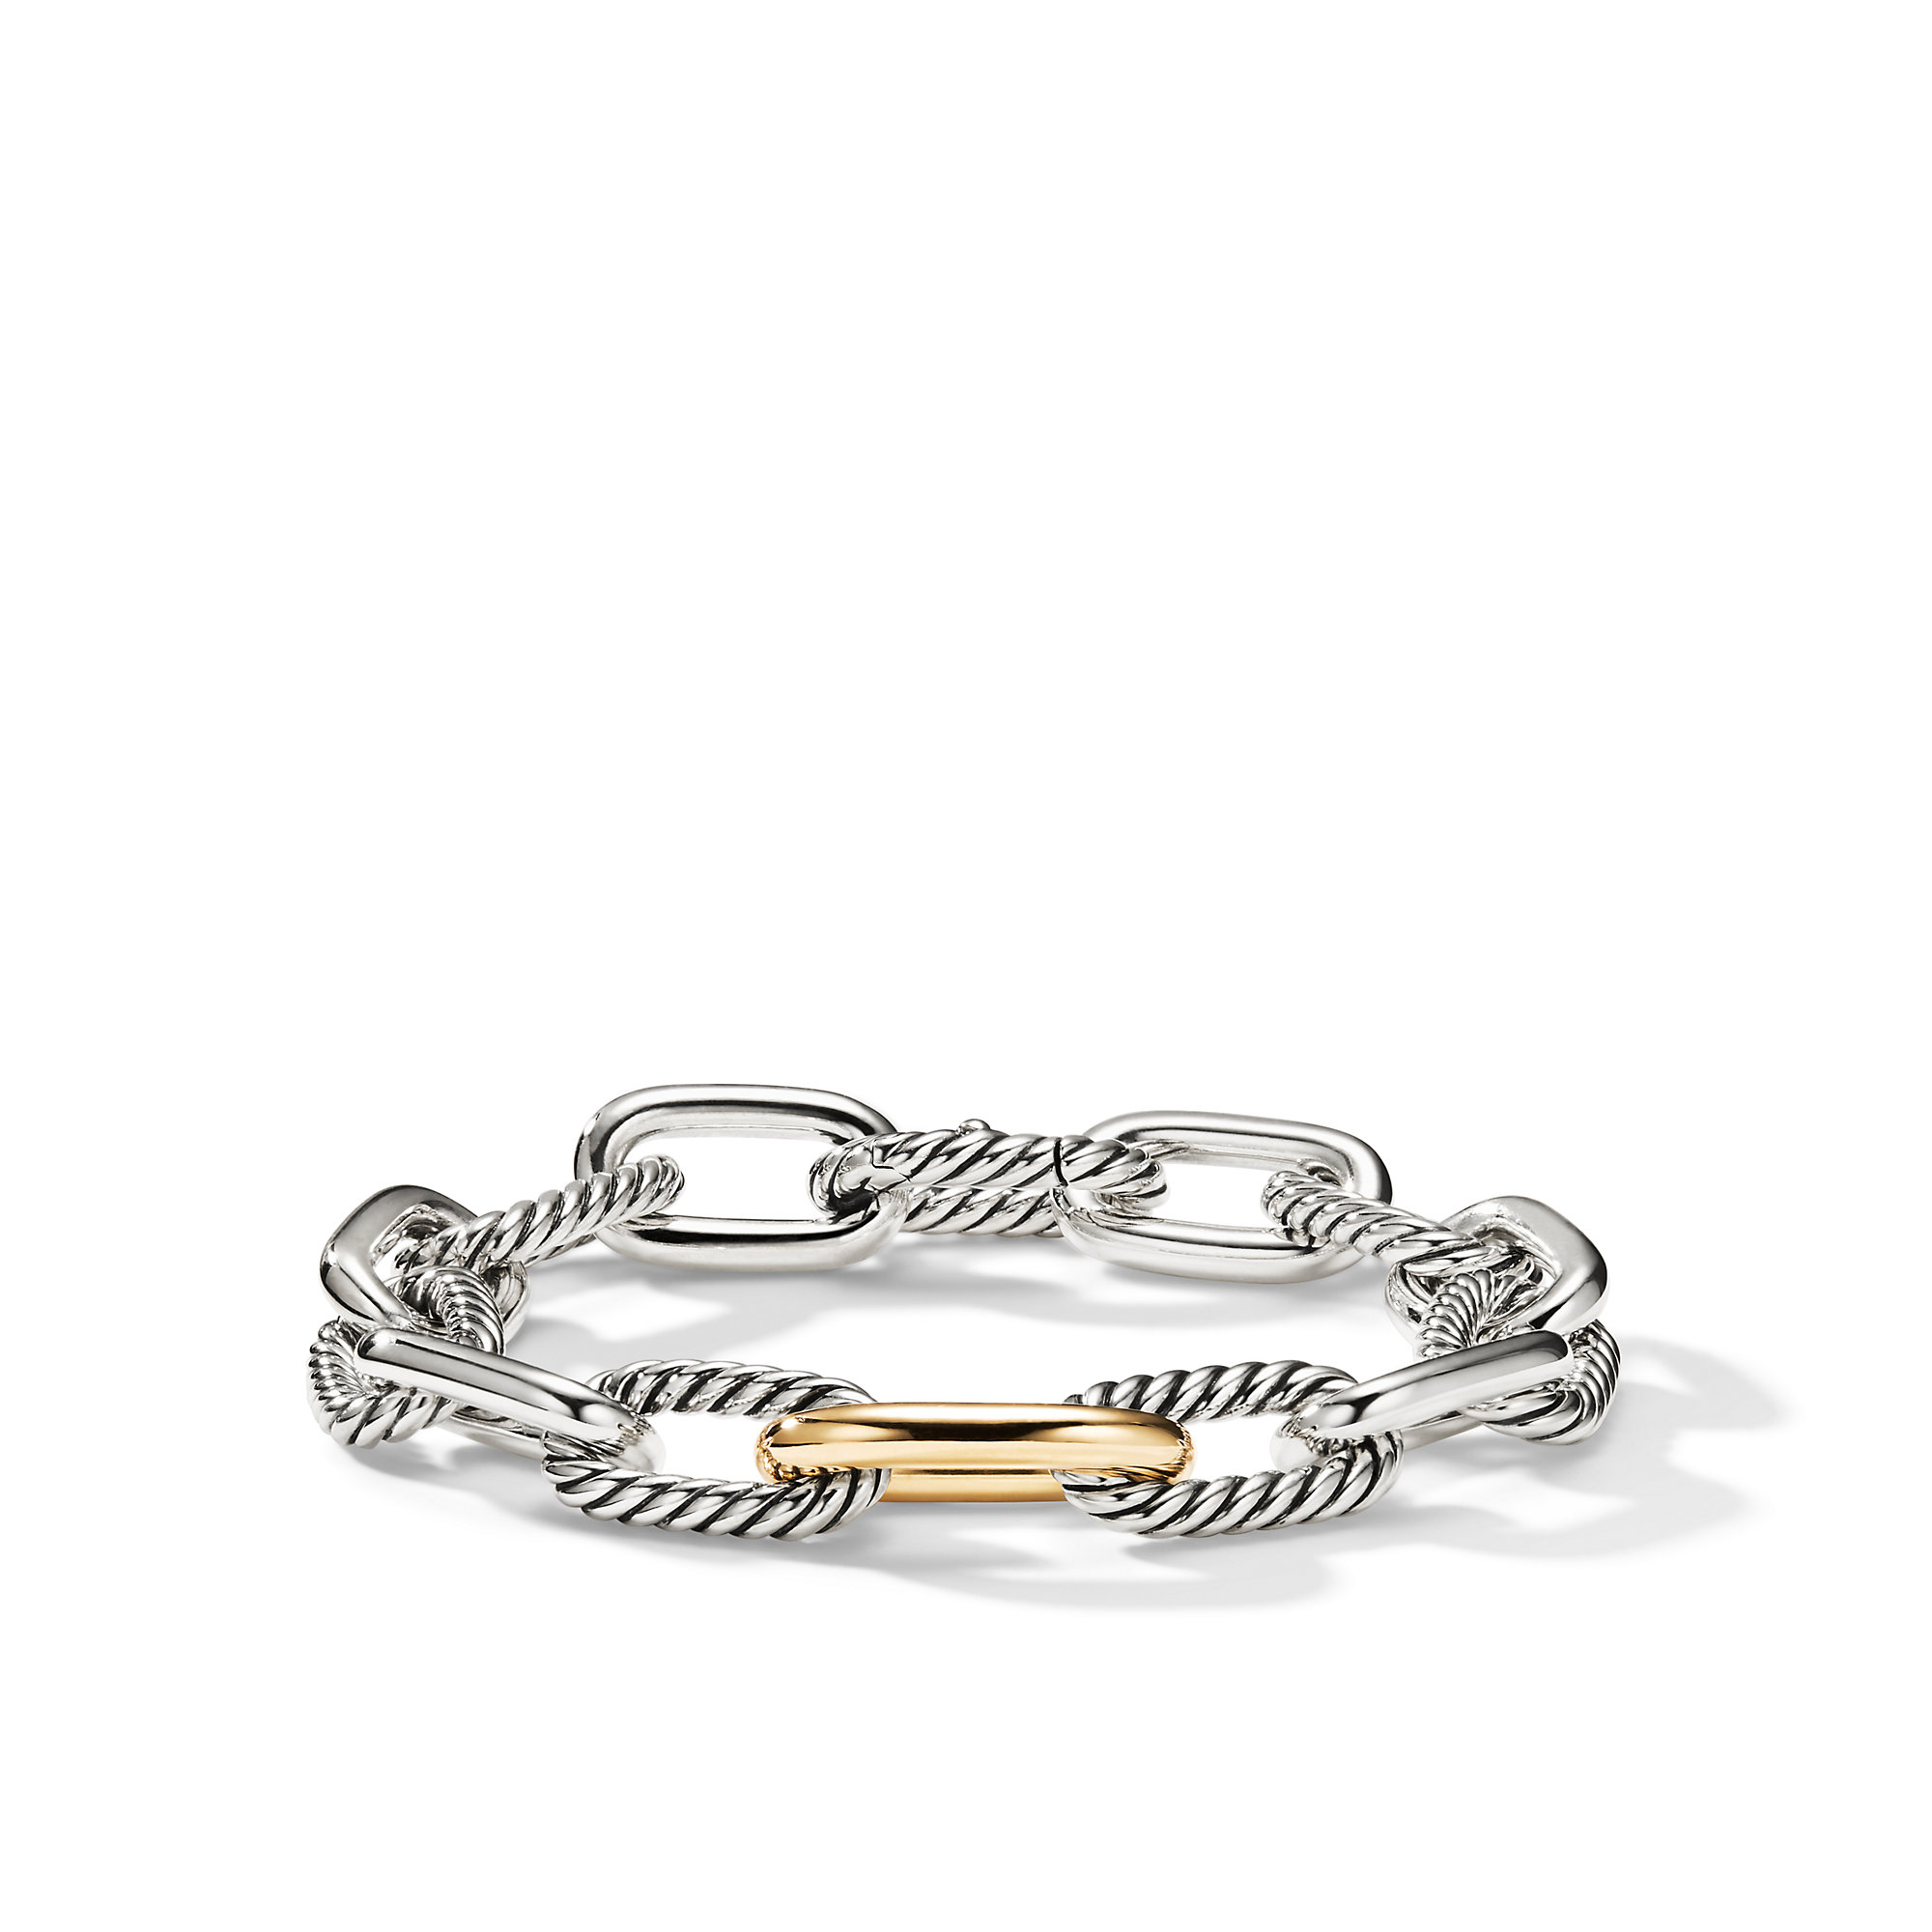 DY Madison® Chain Bracelet in Sterling Silver with 18K Yellow Gold